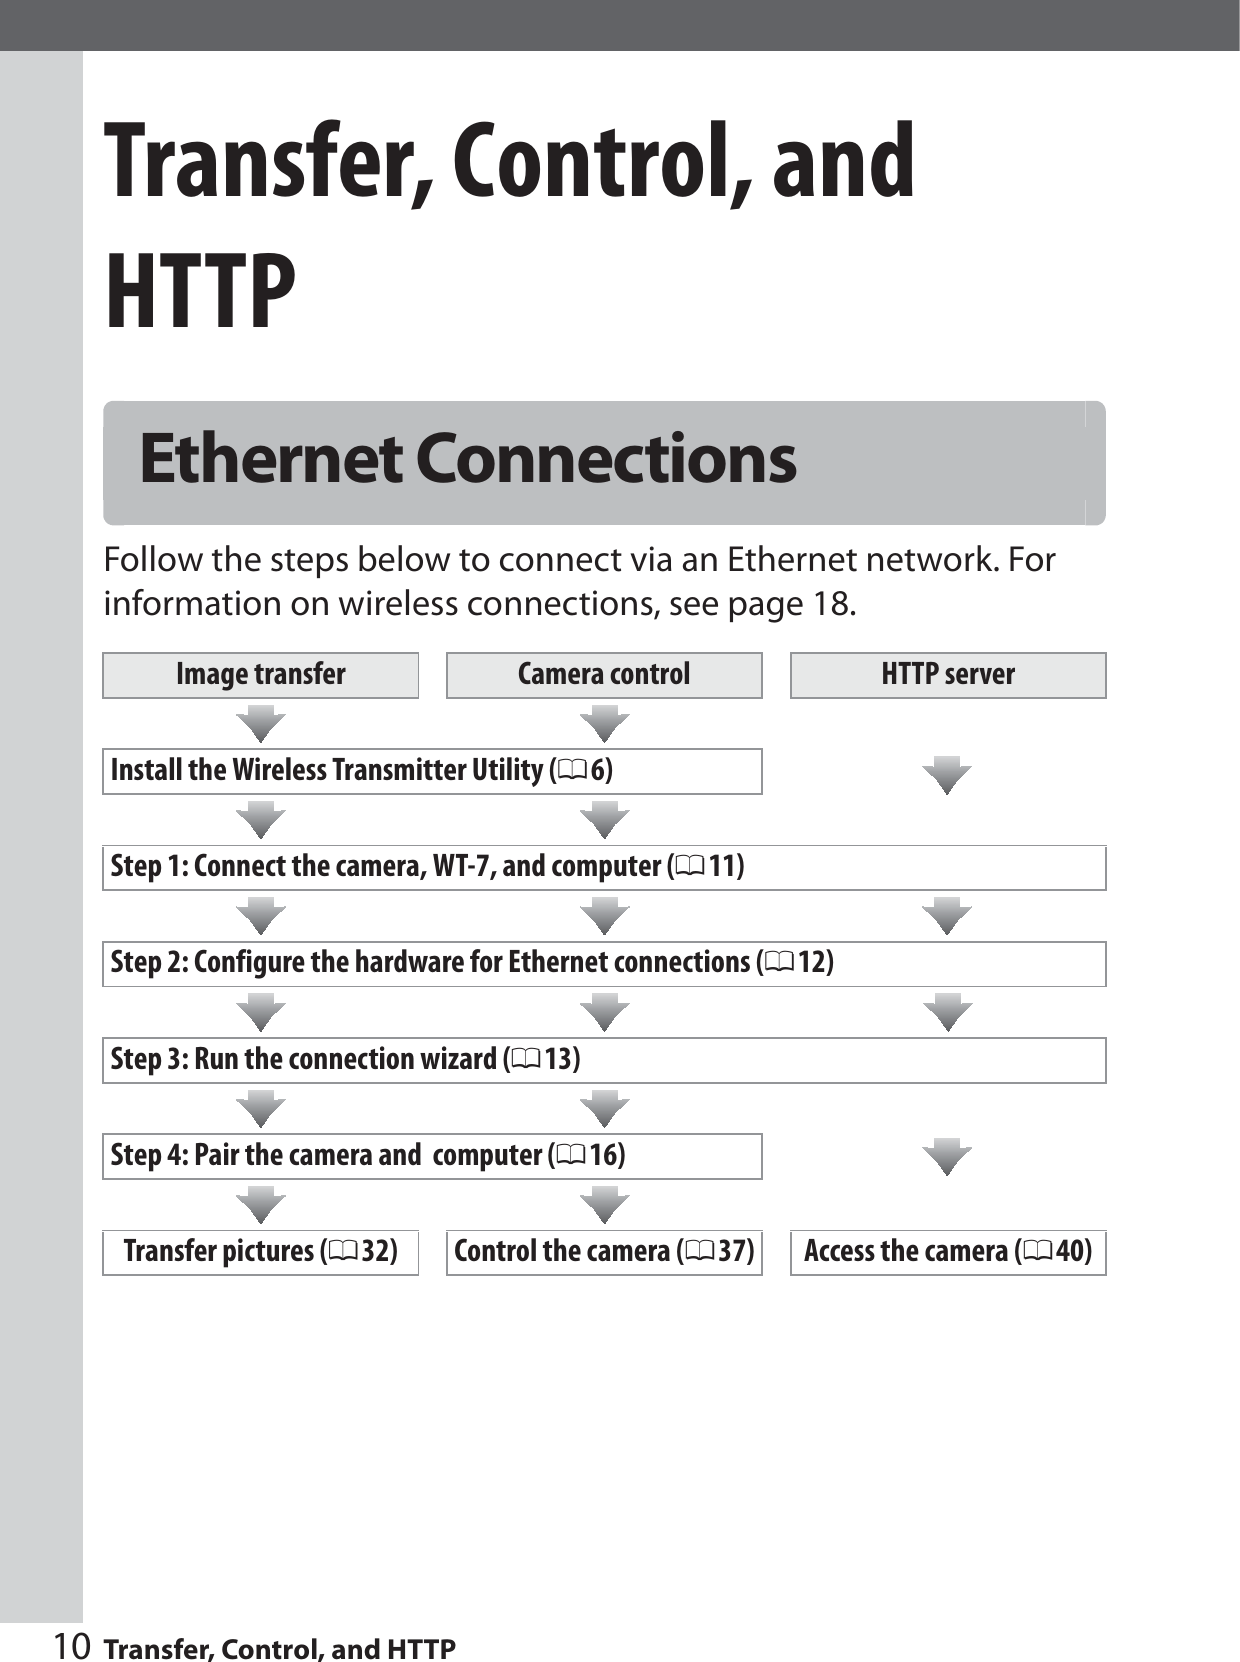 10 Transfer, Control, and HTTPTransfer, Control, and HTTPFollow the steps below to connect via an Ethernet network. For information on wireless connections, see page 18.Ethernet ConnectionsImage transfer Camera control HTTP serverInstall the Wireless Transmitter Utility (06)Step 1: Connect the camera, WT-7, and computer (011)Step 2: Configure the hardware for Ethernet connections (012)Step 3: Run the connection wizard (013)Step 4: Pair the camera and  computer (016)Transfer pictures (032) Control the camera (037) Access the camera (040)